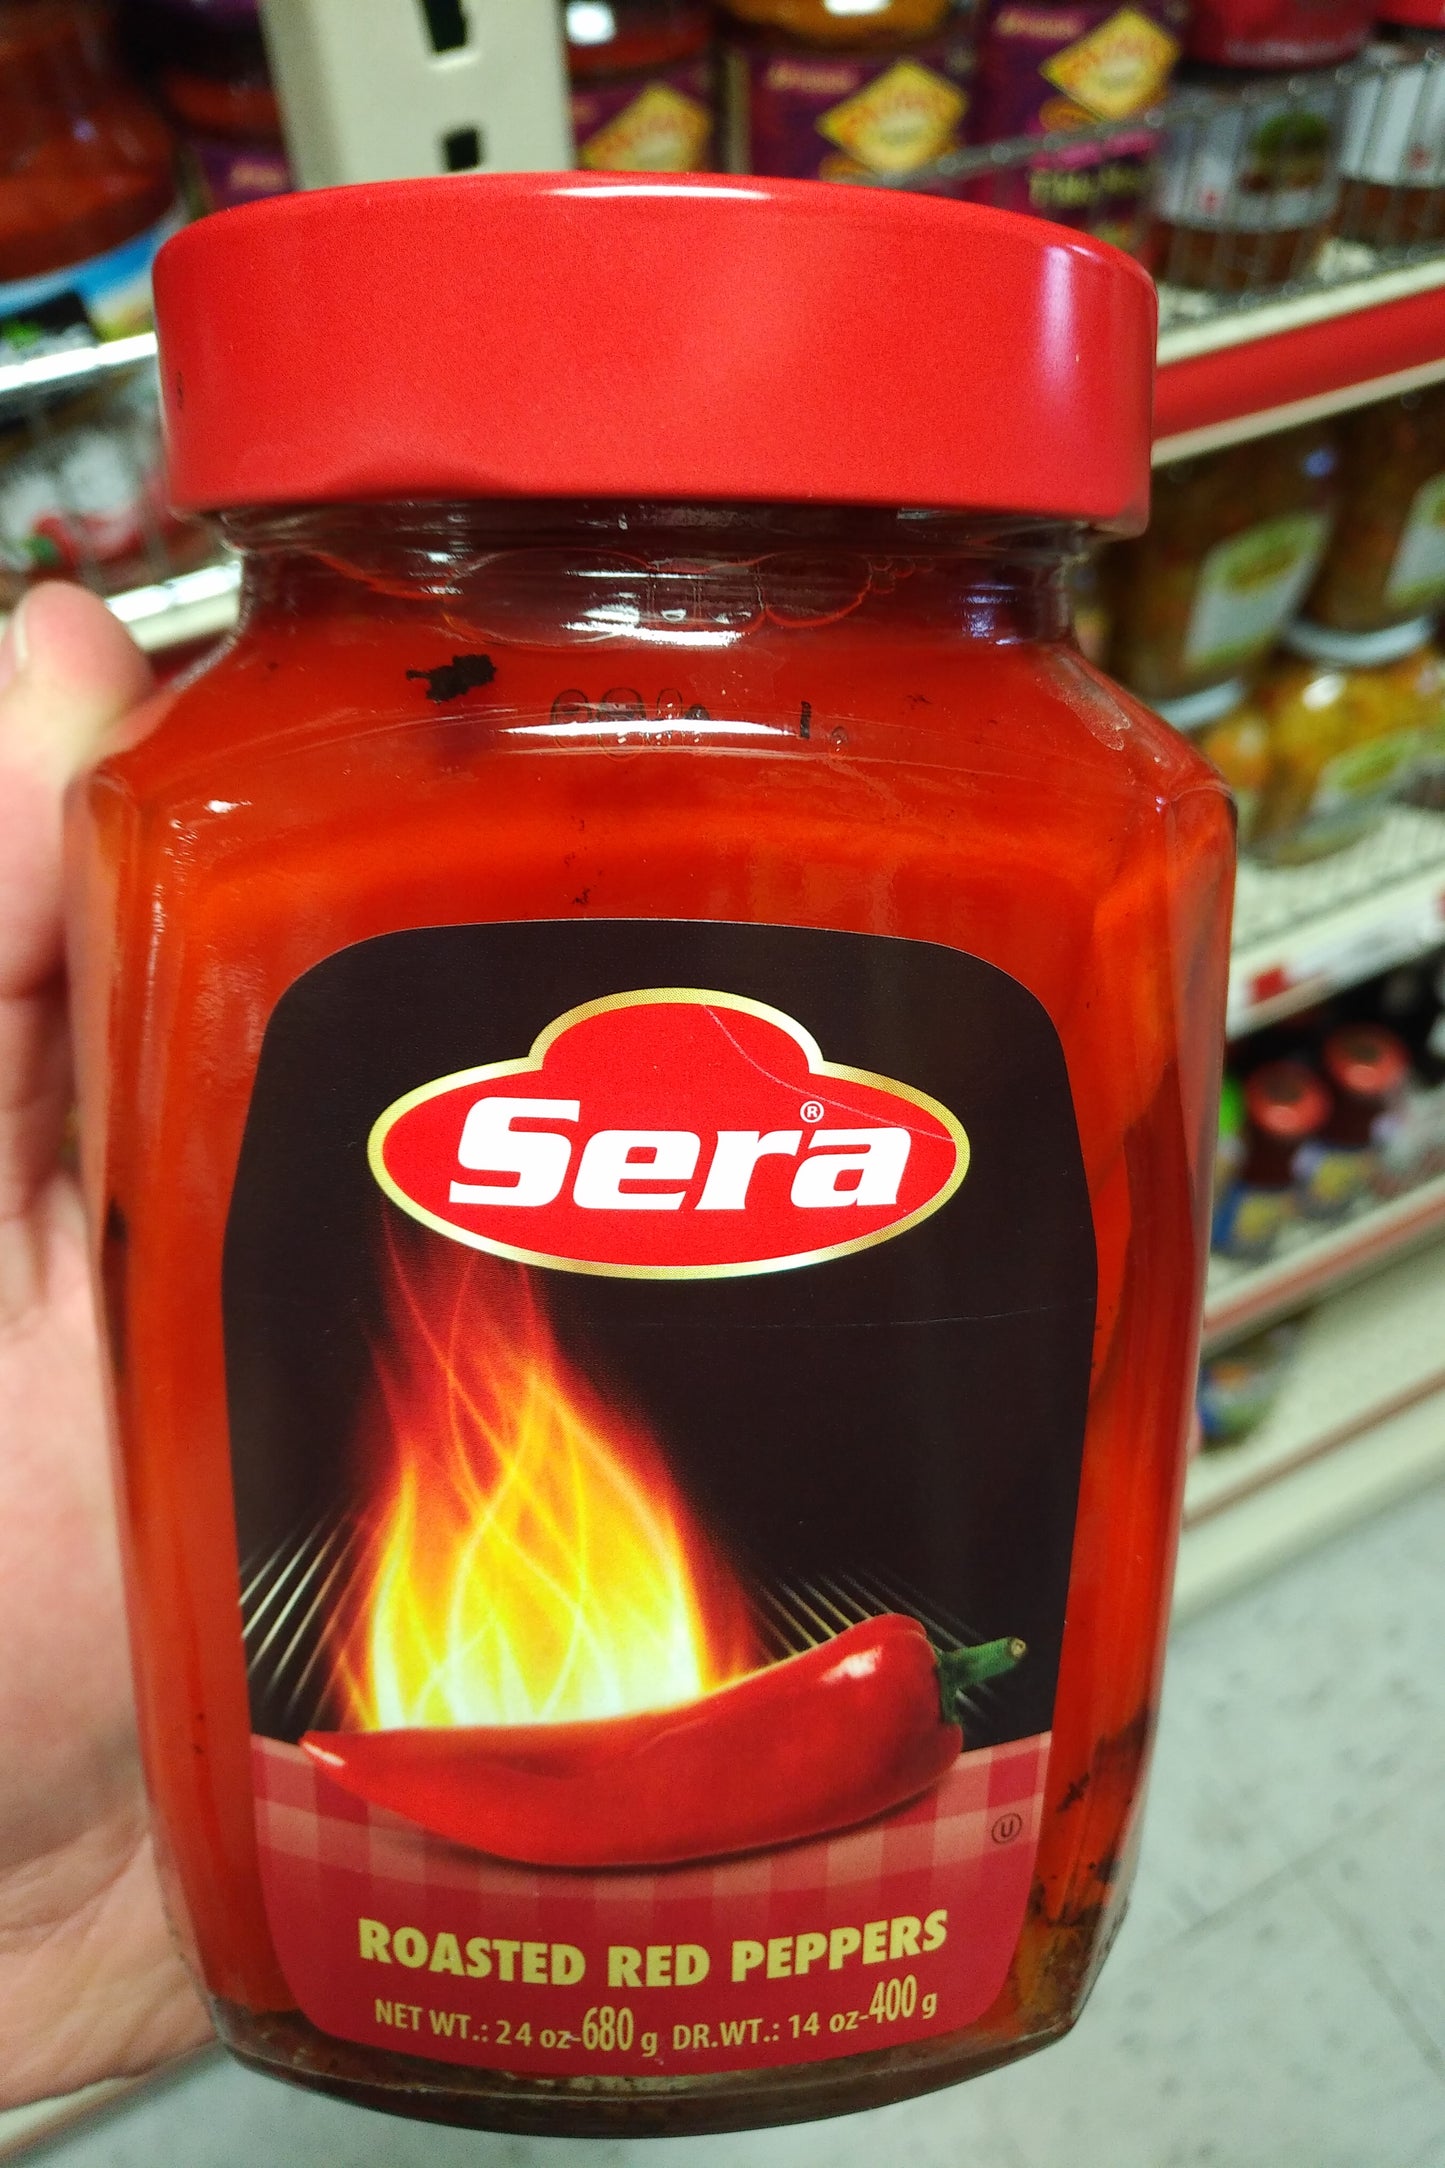 Sera Roasted Red Peppers 680gr